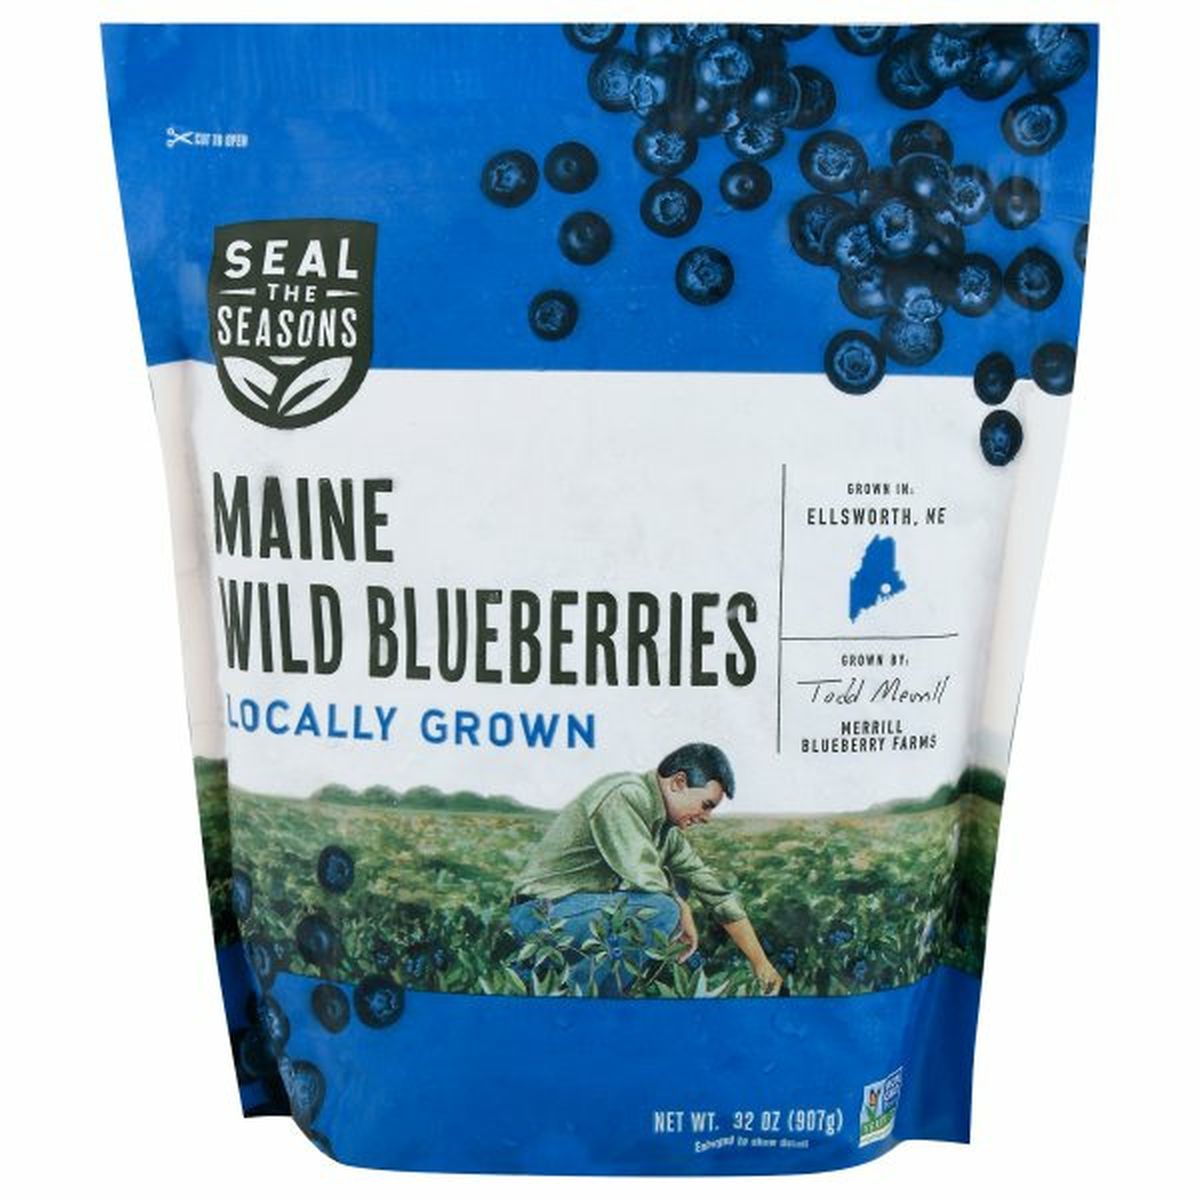 Calories in Seal the Seasons Maine Wild Blueberries